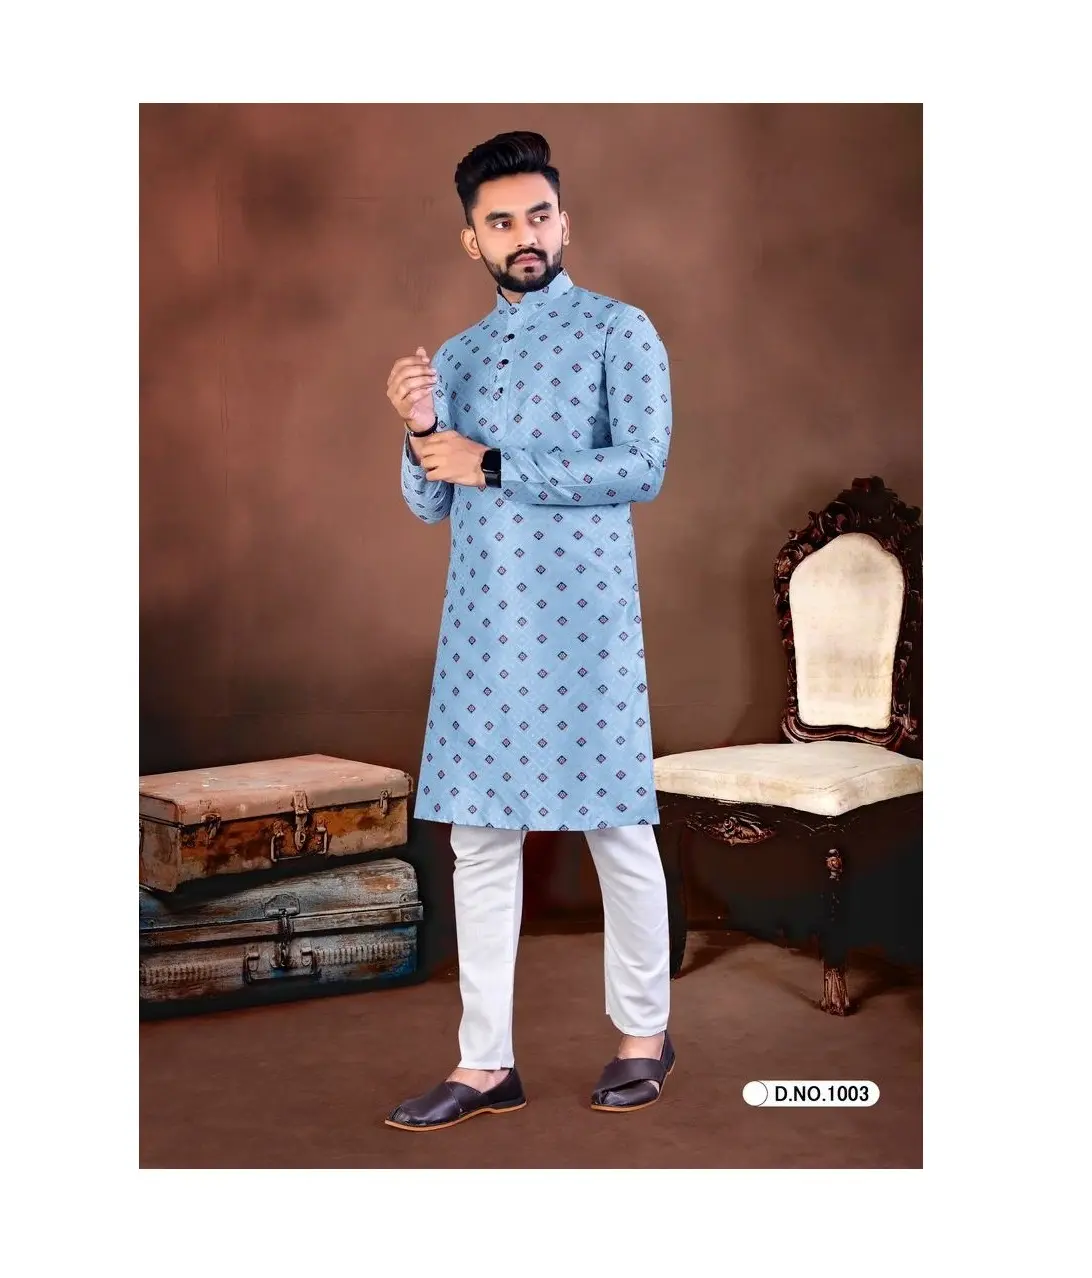 Hot Selling Indian Traditional Self Design Multicolor Print Full Sleeve Kurta Pajama for Men from Indian Supplier Wholesaler